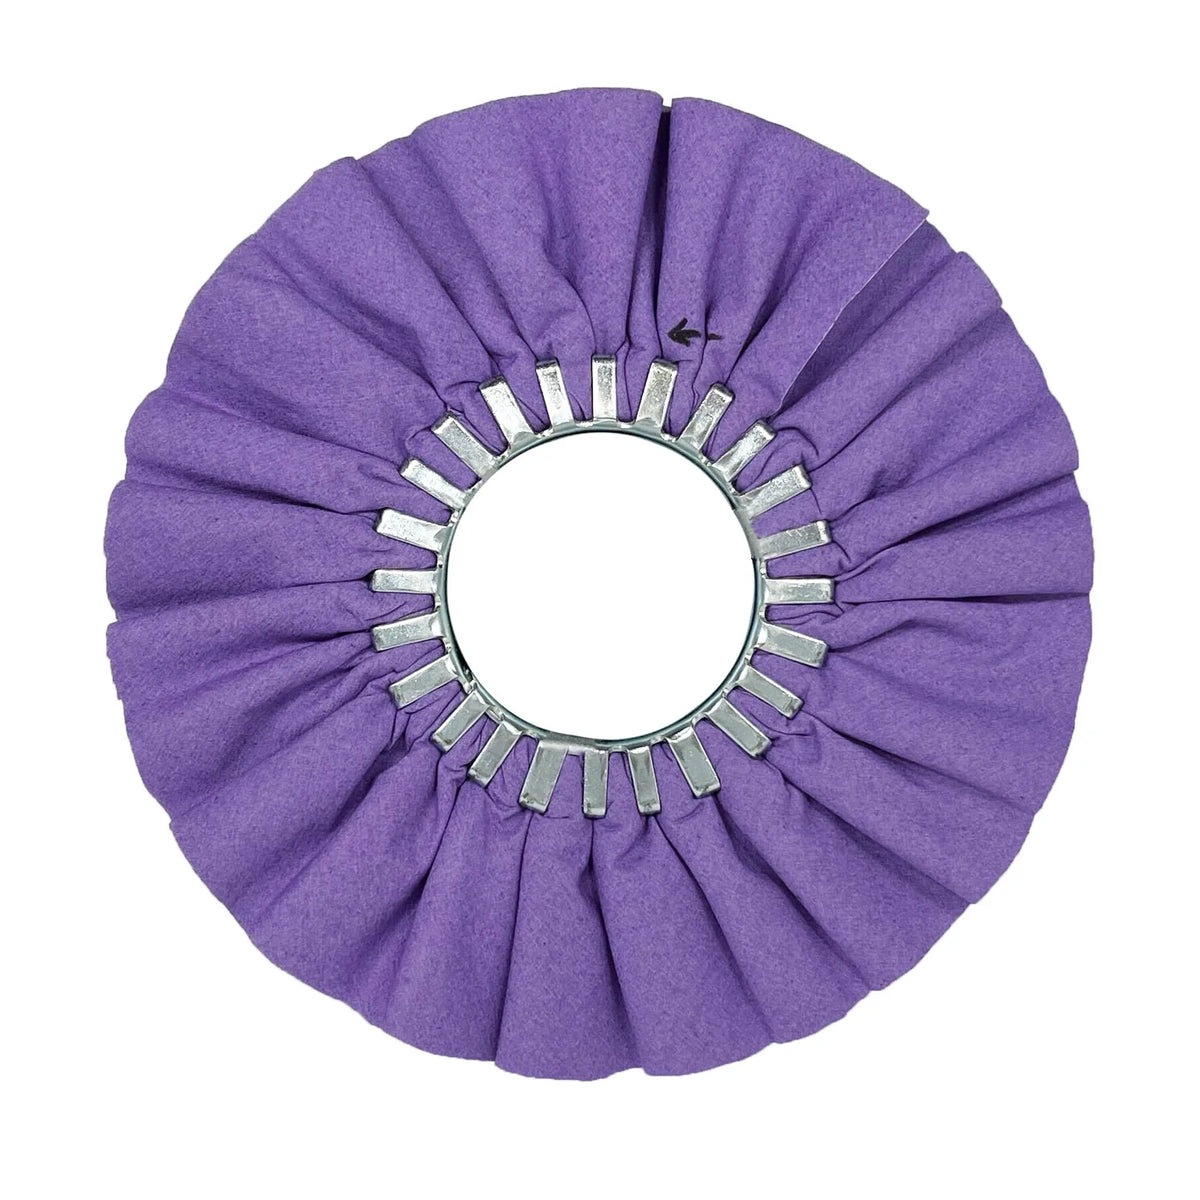 Renegade Products Purple Airway Buffing Wheel for Metal Polishing, displayed on a neutral background. This professional-grade buffing wheel is specifically designed for polishing metals, featuring a unique purple coloring and sturdy construction. Ideal for achieving a smooth and reflective finish on a variety of metal surfaces.